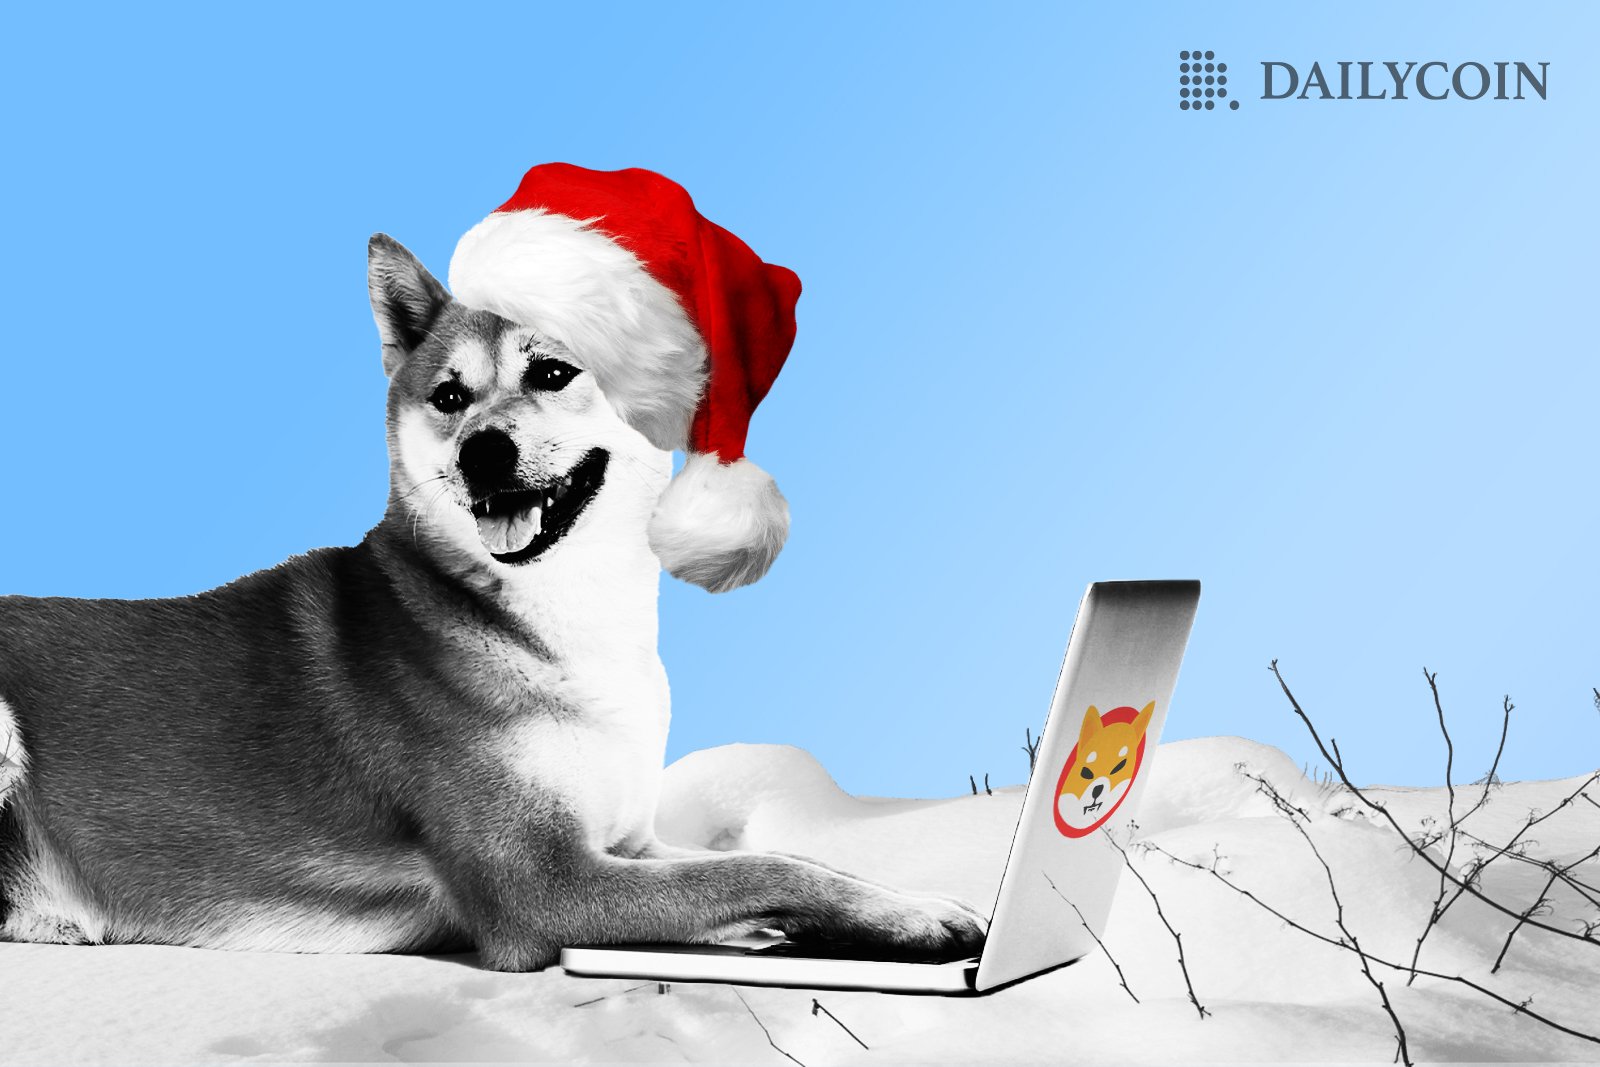 Shiba Inu wearing a Christmas hat using a computer outside on snowy grass